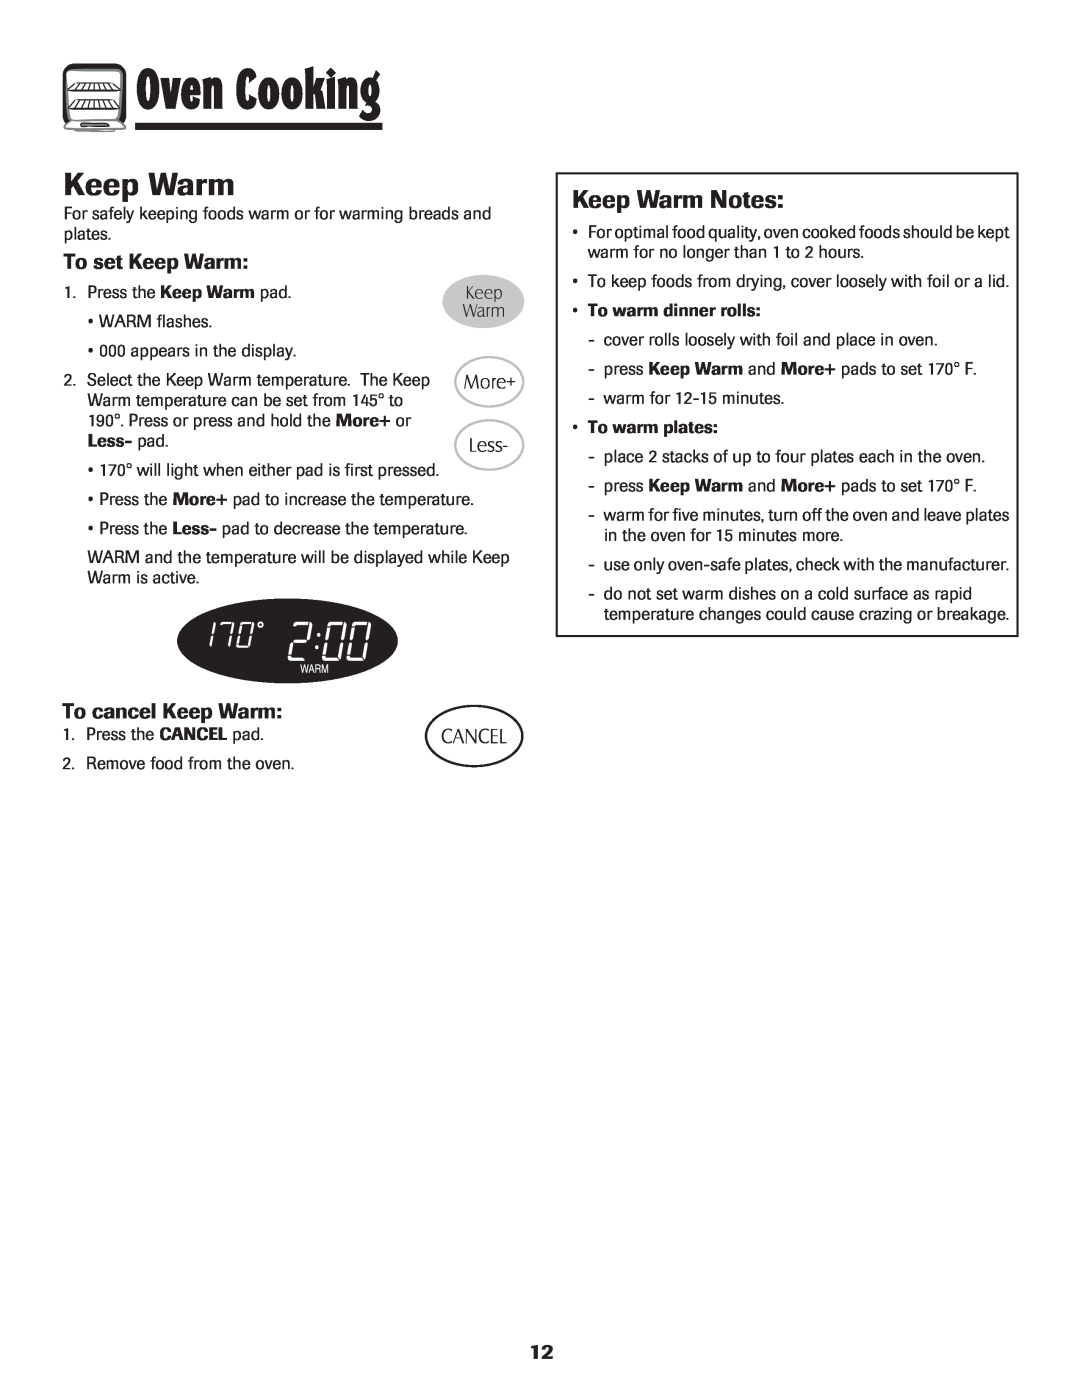 Maytag Range important safety instructions Keep Warm Notes, To set Keep Warm, To cancel Keep Warm, Oven Cooking 